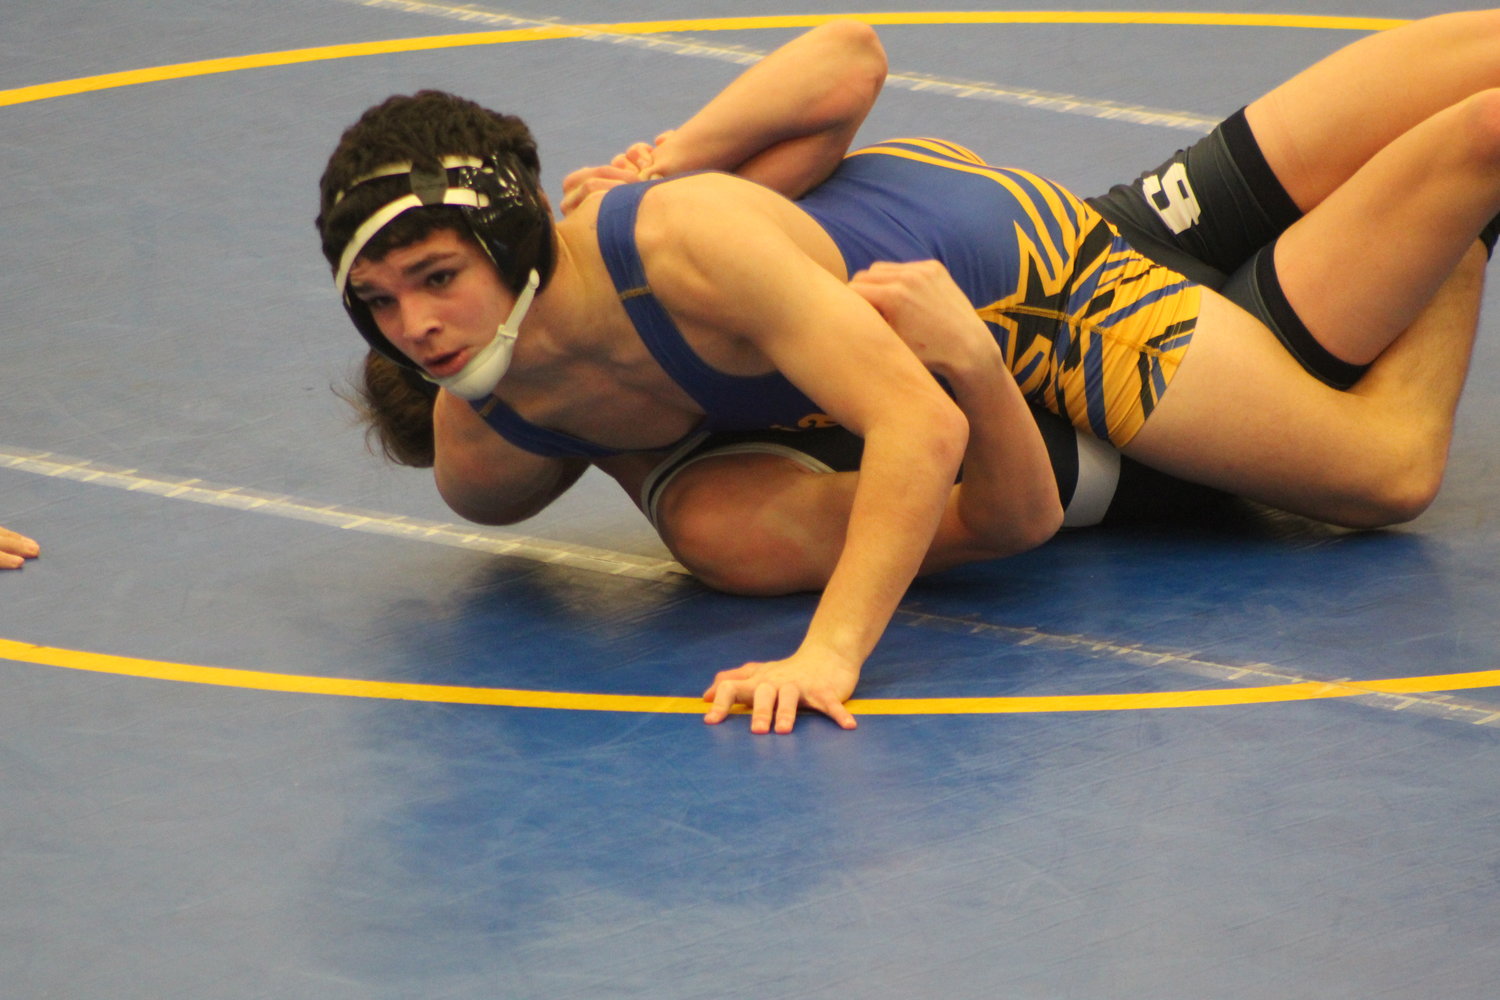 Crawfordsville's Landon Vaught defeated his opponent at 138 lbs on Thursday as CHS hosted Seeger.